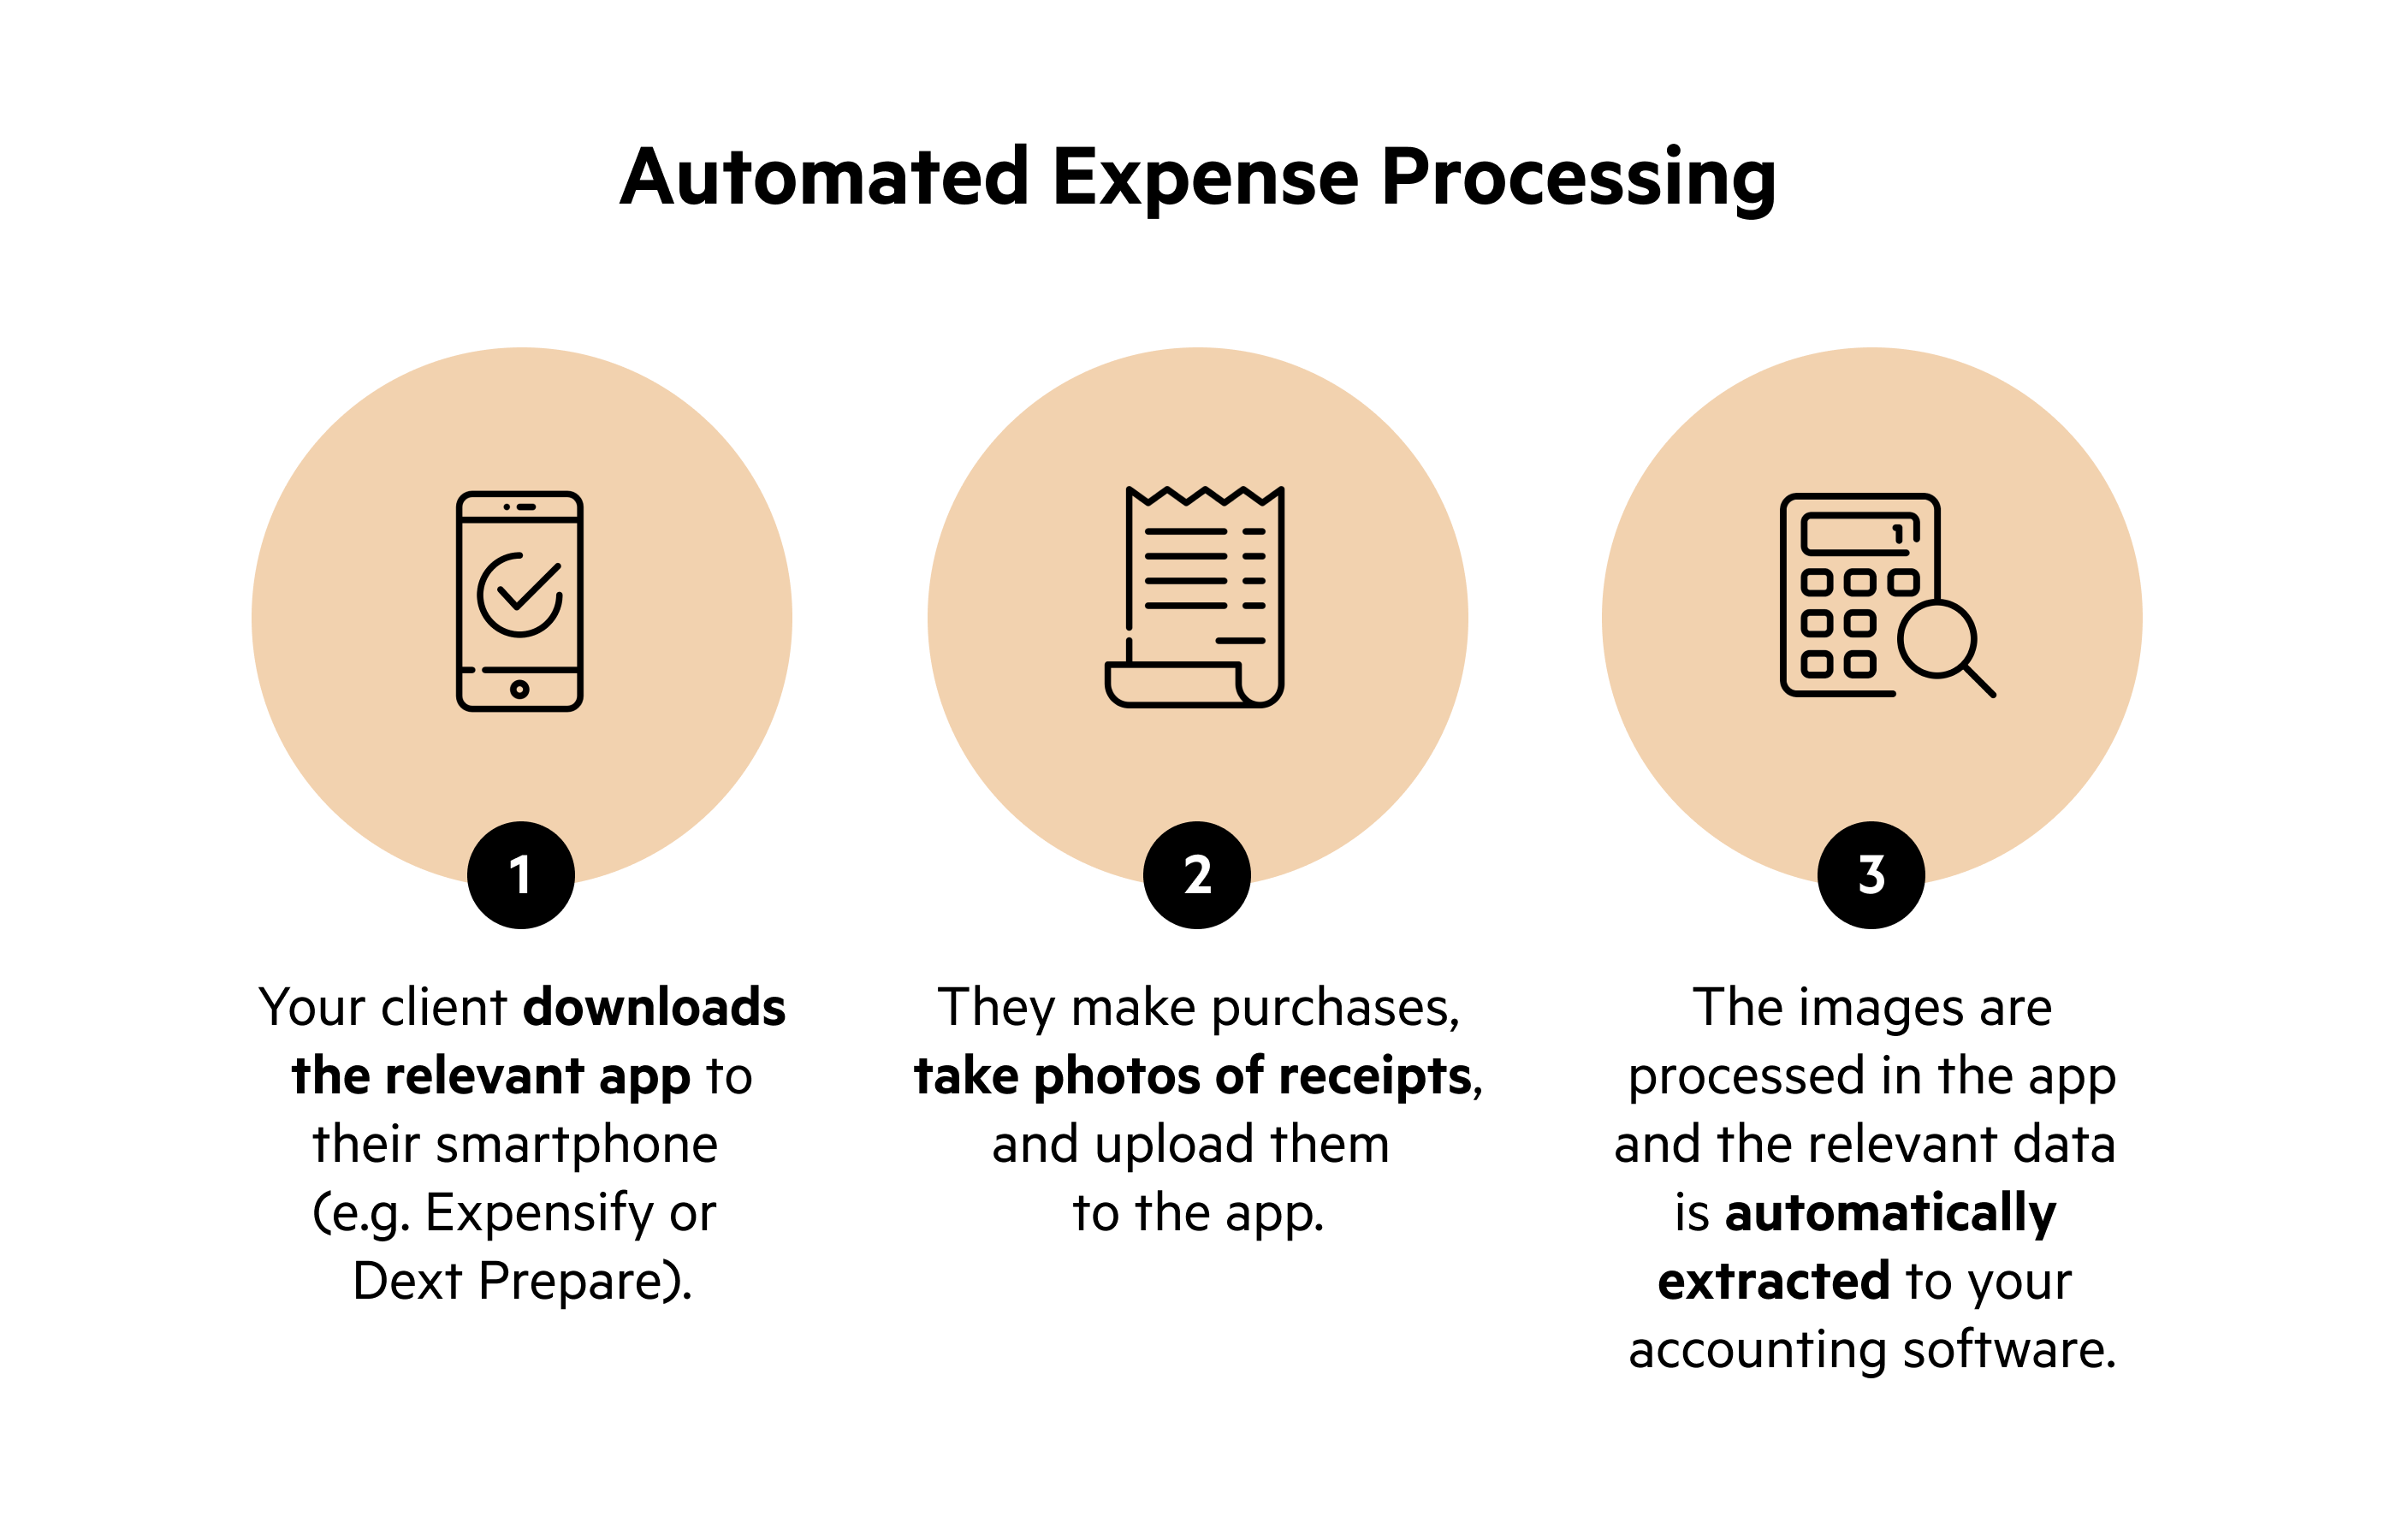 A diagram of a 3-step overview of the key parts of automated expense processing.